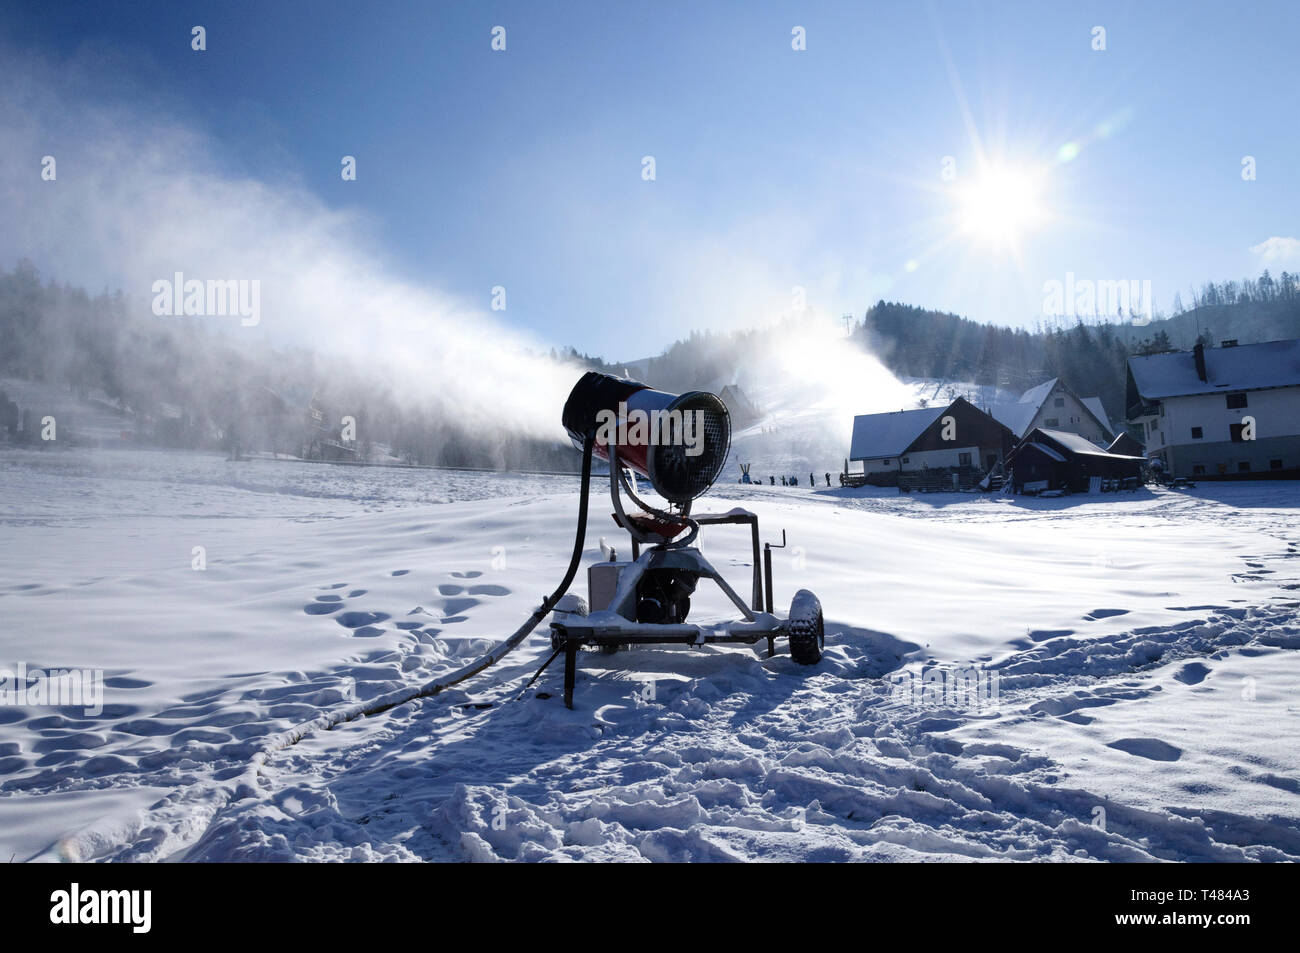 https://c8.alamy.com/comp/T484A3/landscape-of-a-mountain-ski-resort-where-slope-are-prepare-by-snowmaking-machine-with-artificial-white-snow-footsteps-in-deep-snow-cover-mountain-a-T484A3.jpg